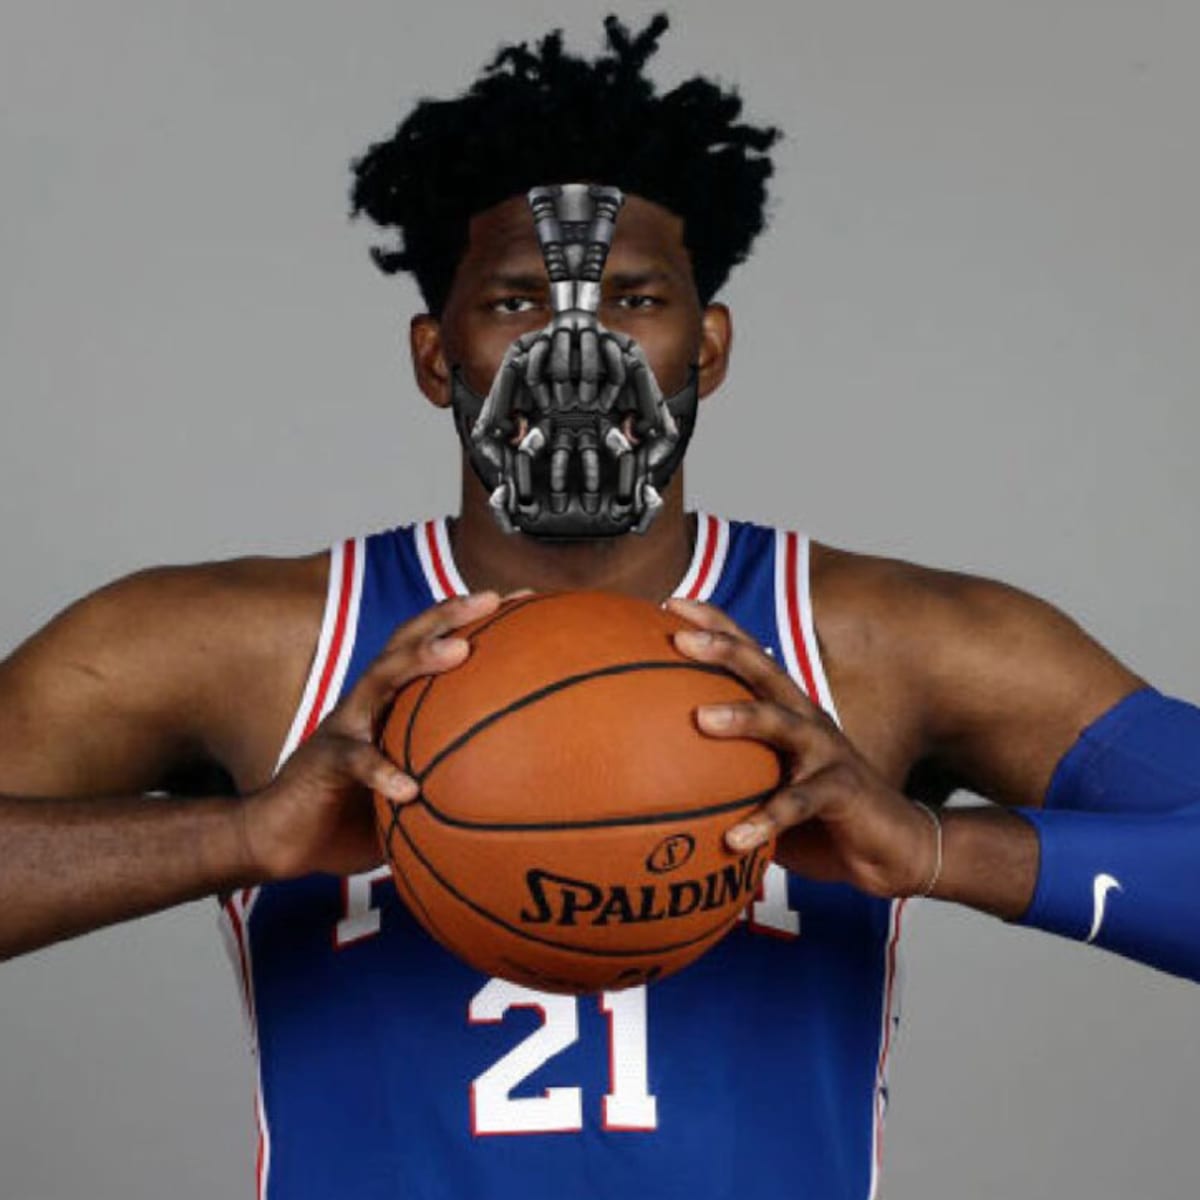 Why Does Joel Embiid Wear a Mask? 76ers Fans Want to Know